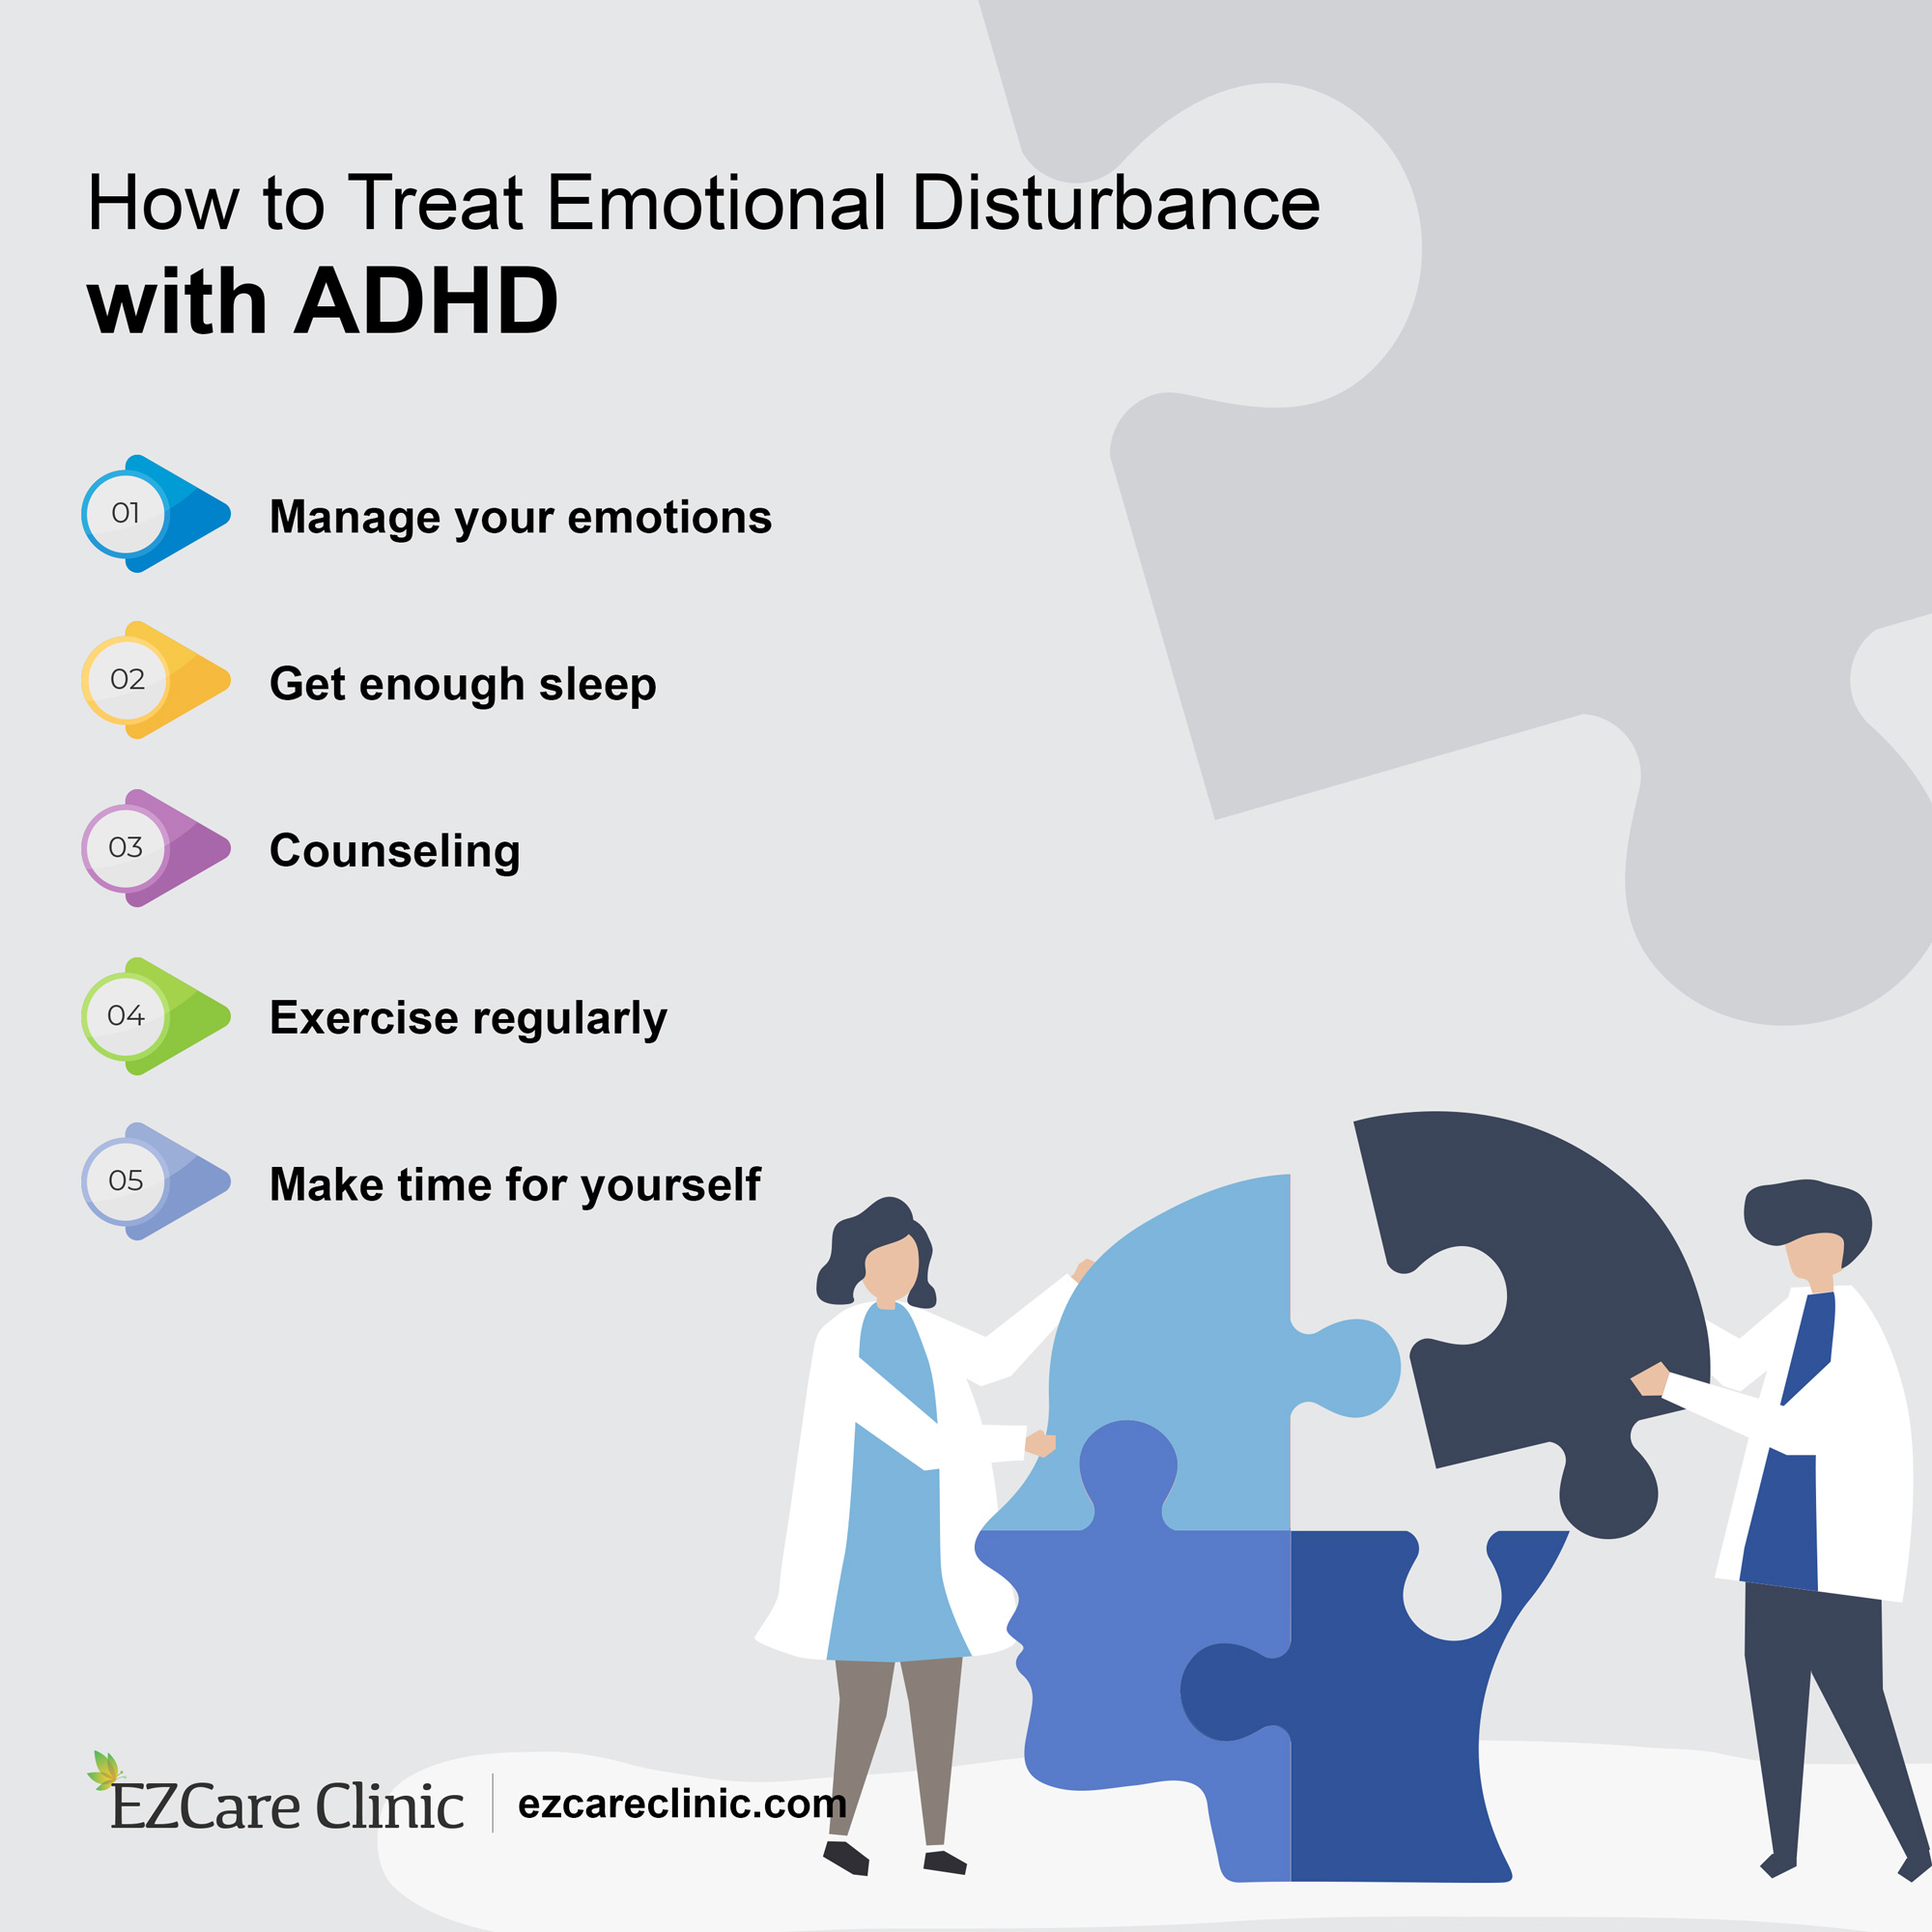 How to cure emotional disturbance caused by ADHD